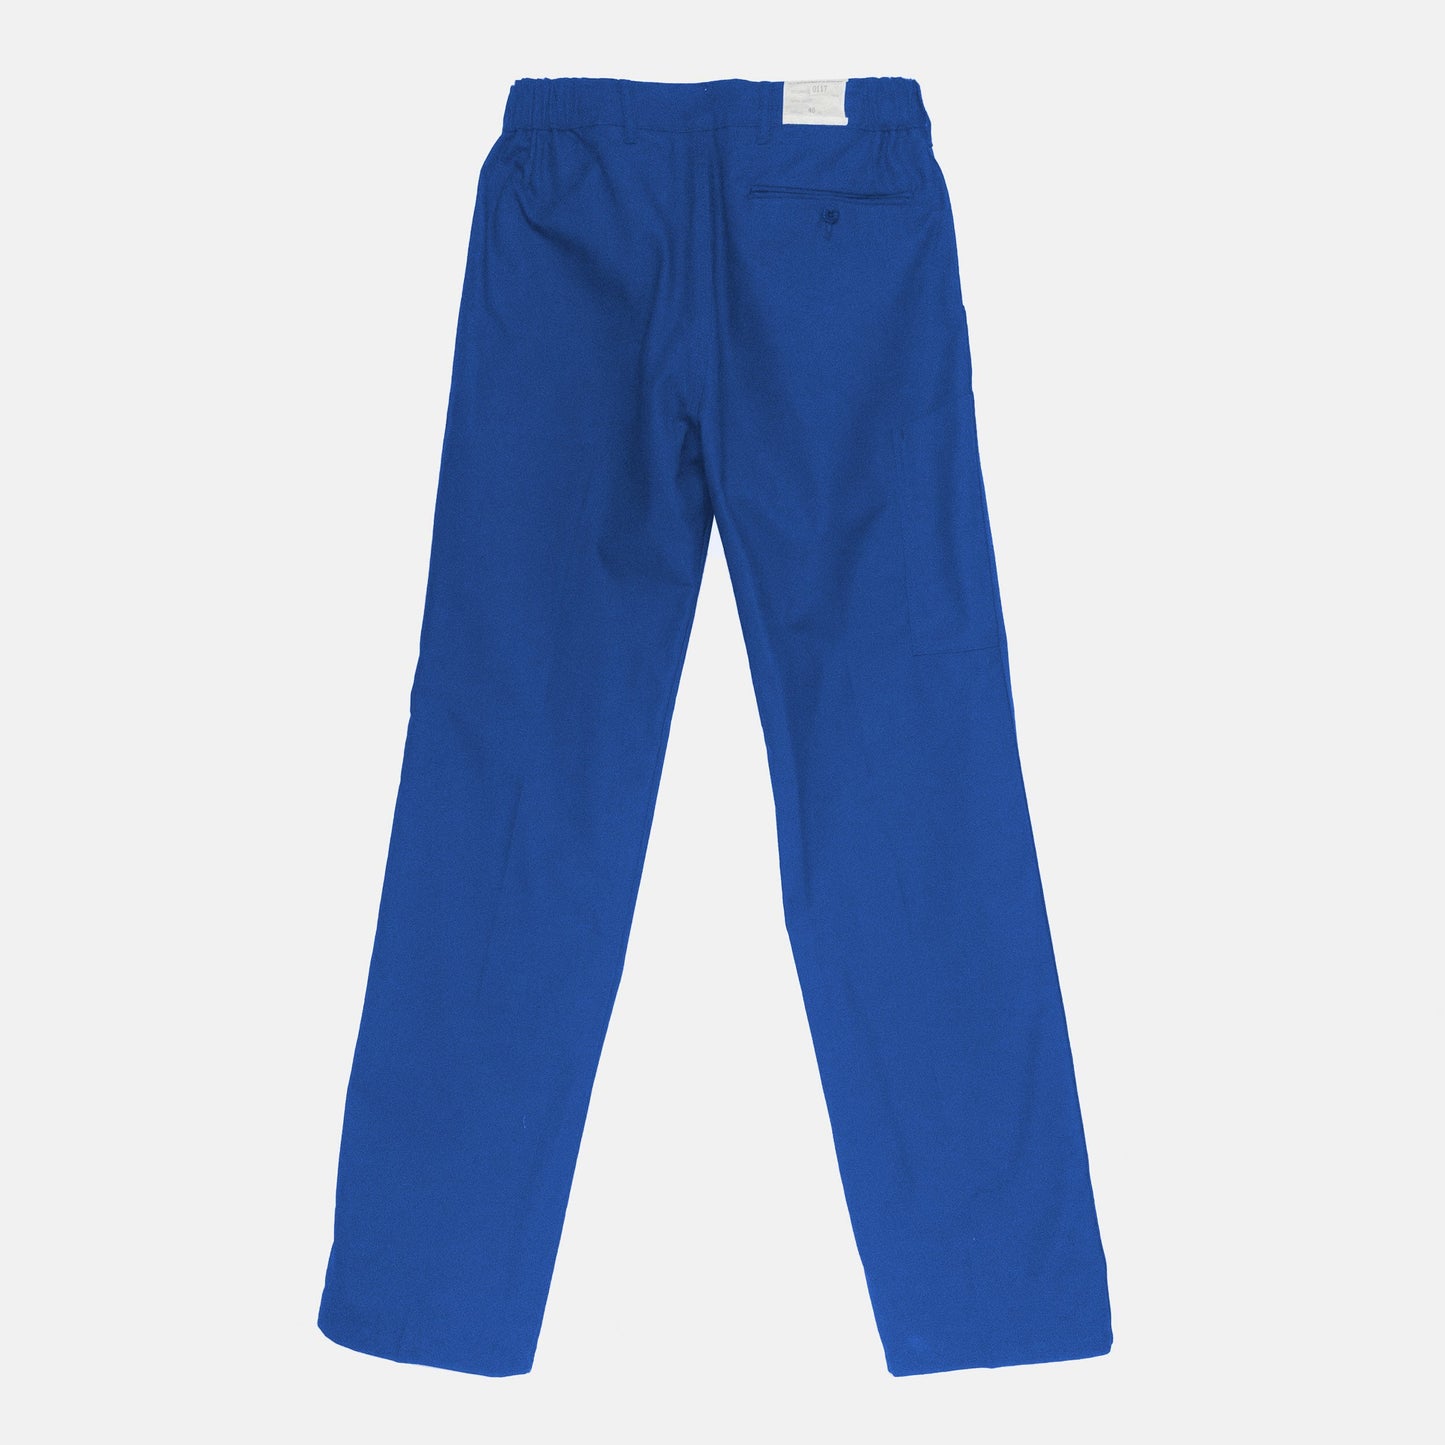 Le Laboureur French Cotton Work Pant in French Blue